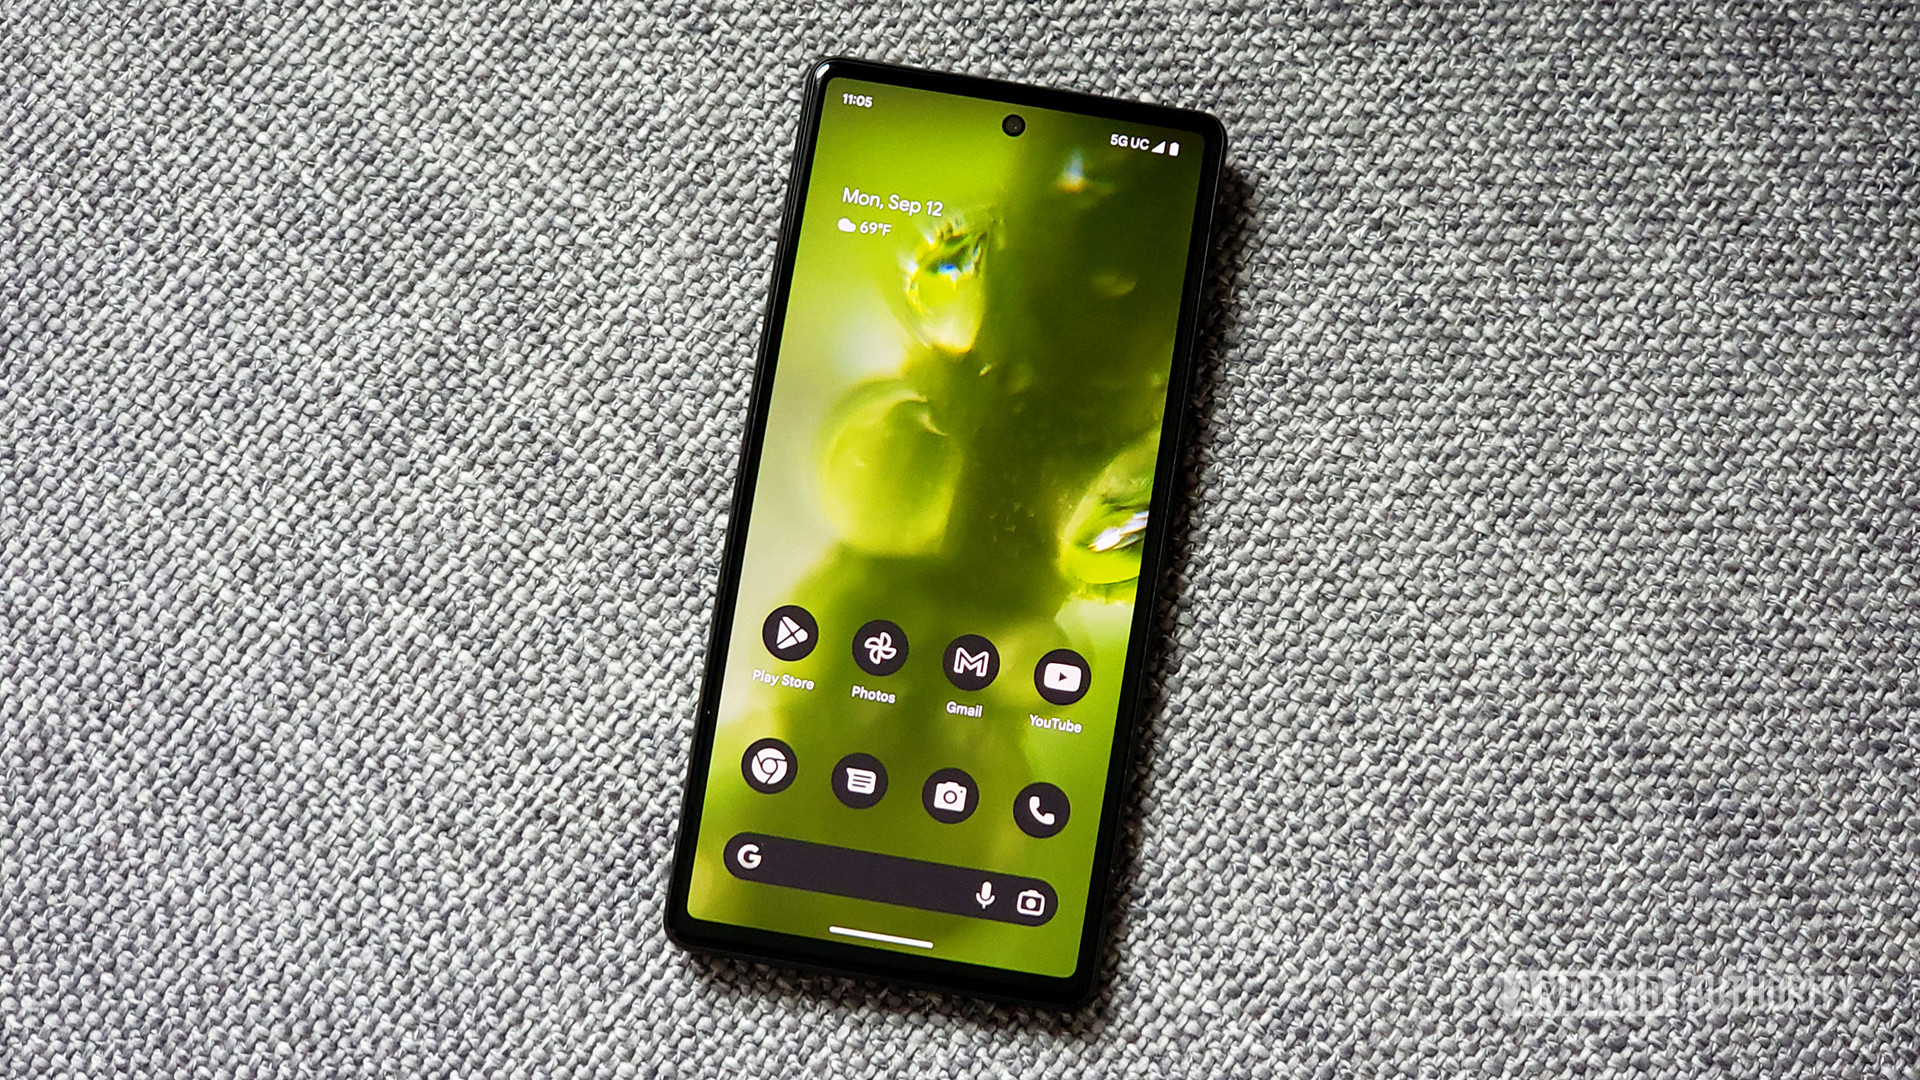 Wallpaper Wednesday: Android wallpapers 2022-09-14 - Android Authority